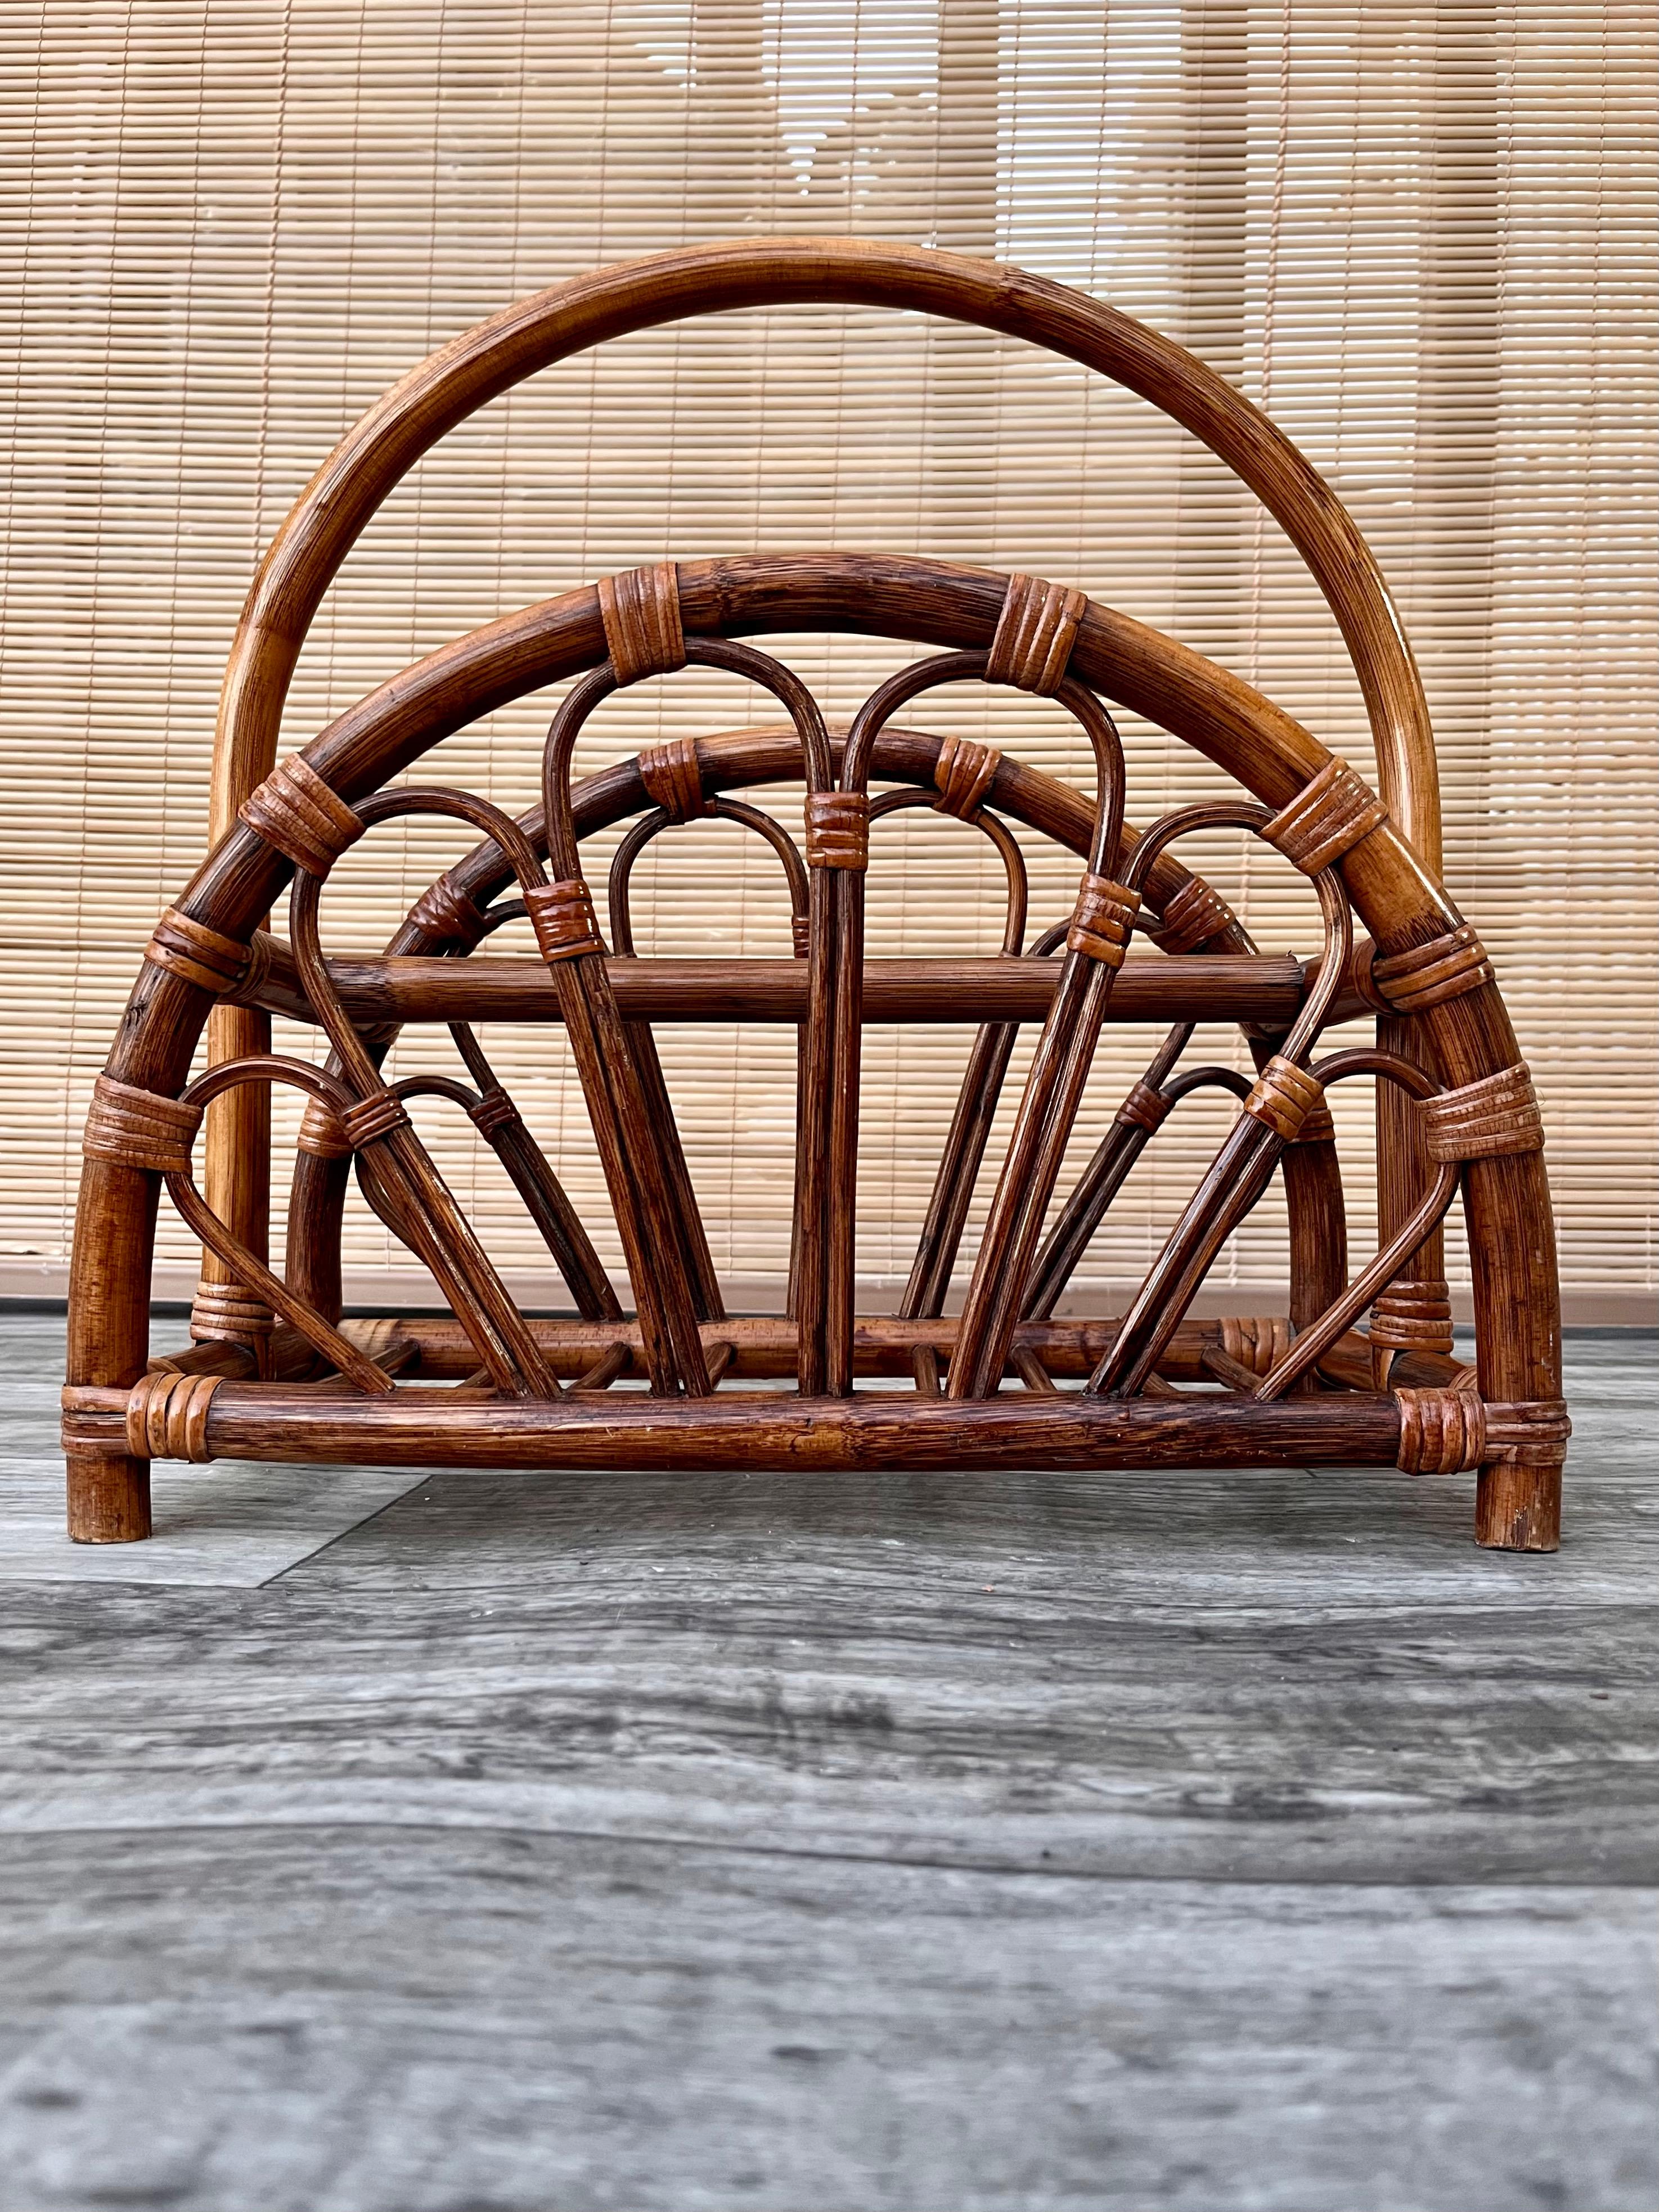 Vintage Mid-Century Modern Rattan bamboo magazine rack in the Style of Franco Albini. Circa 1970s.
Features an arched rattan frame designed in the style of Franco Albini & McGuire, and Ficks Reed. 
In excellent original condition with minor signs